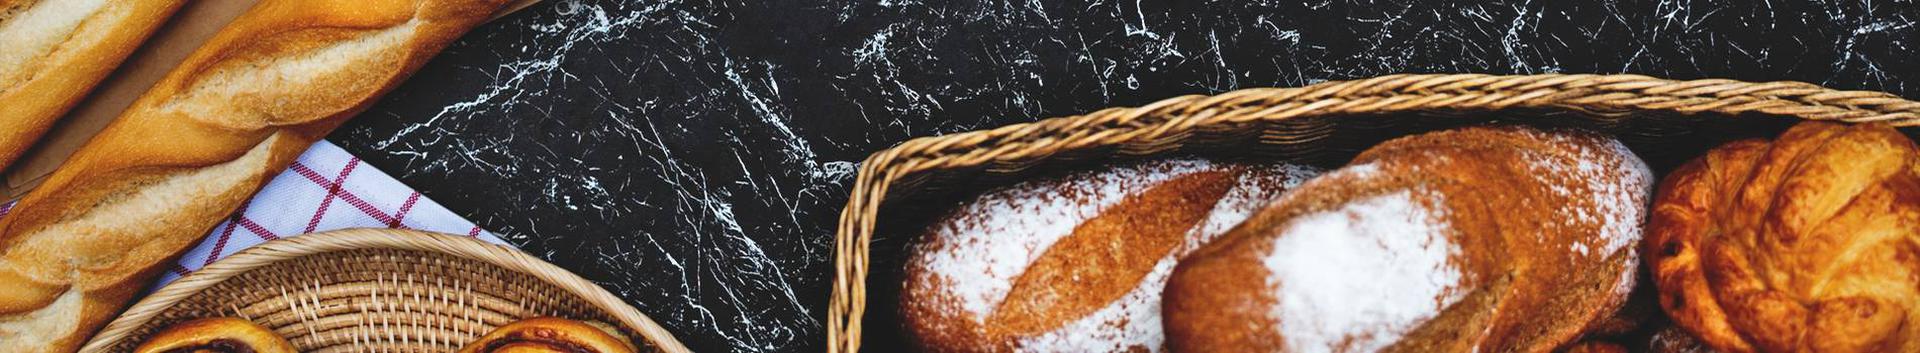 Karja Pagar offers handmade bread in the village of Karja, Saaremaa. Our range includes insular and handmade form breads, floor breads, pastries and sweet baked goods. Our separate selection is for restaurants (horeca).